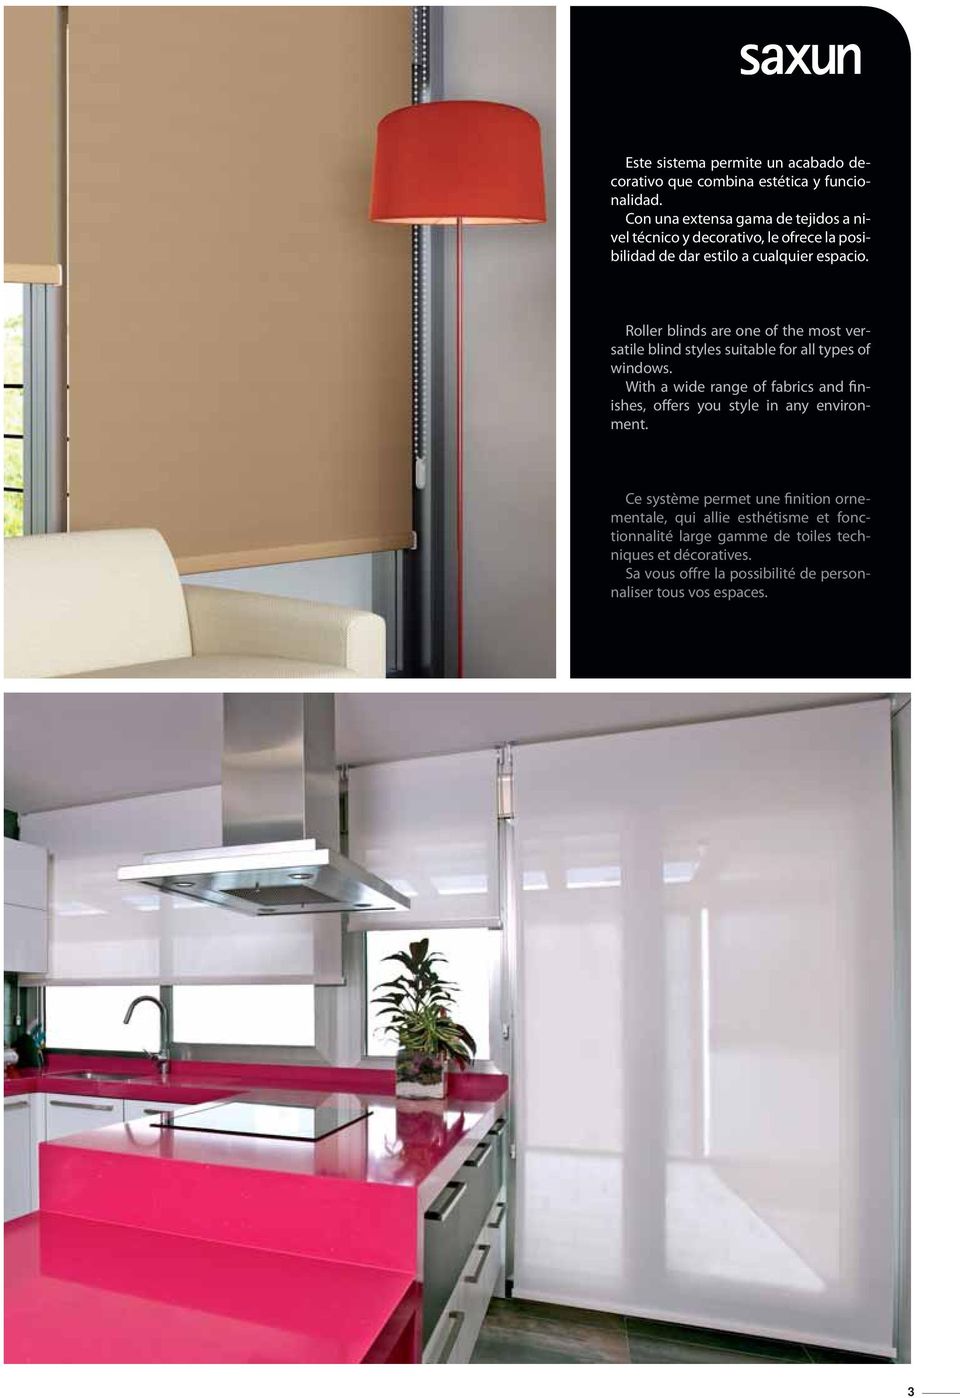 Roller blinds are one of the most versatile blind styles suitable for all types of windows.